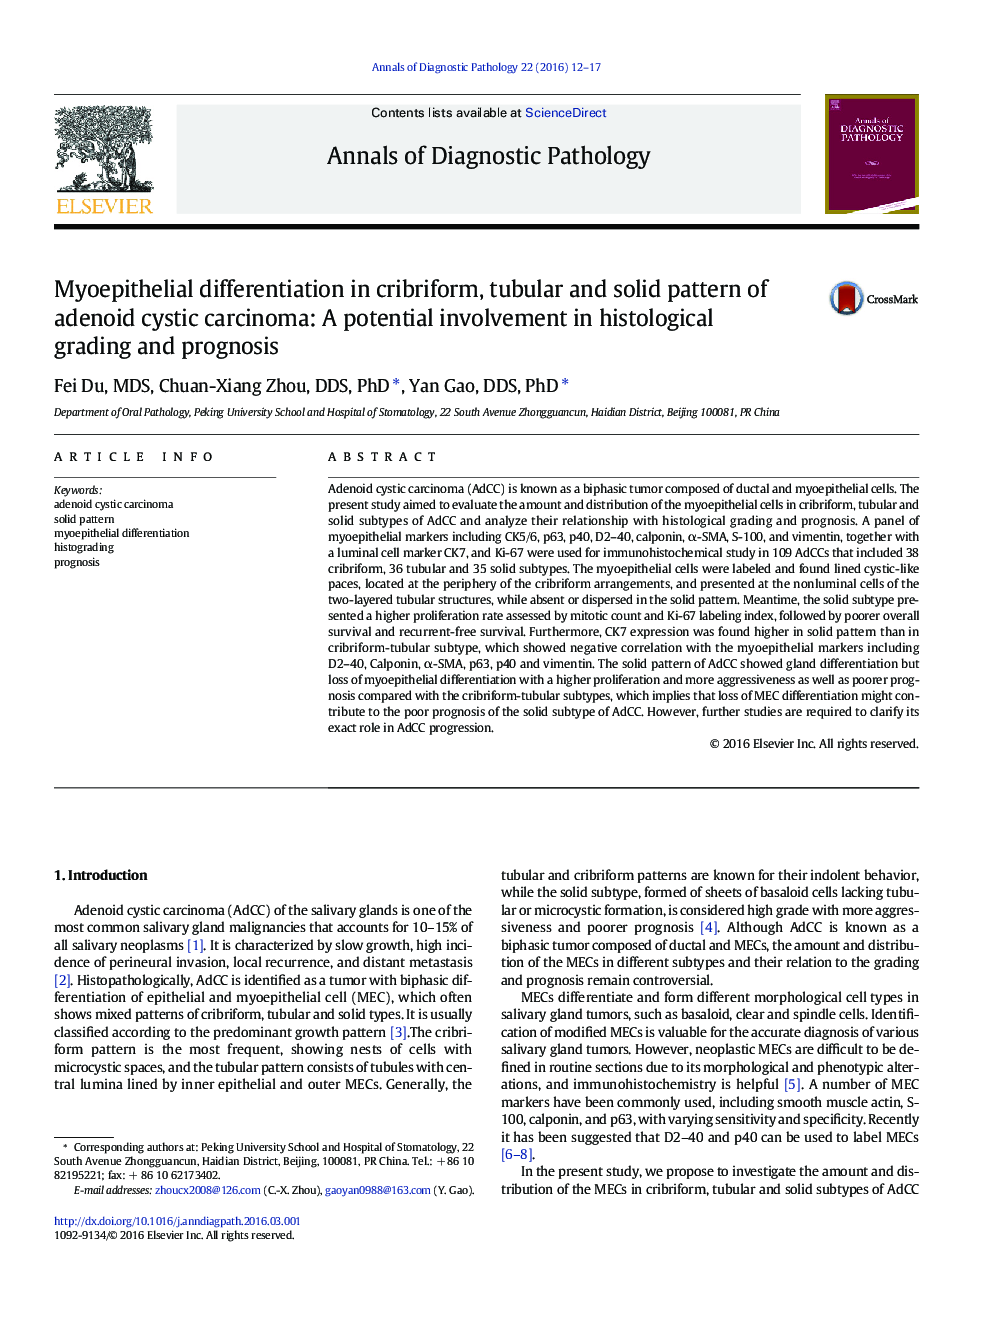 Myoepithelial differentiation in cribriform, tubular and solid pattern of adenoid cystic carcinoma: A potential involvement in histological grading and prognosis